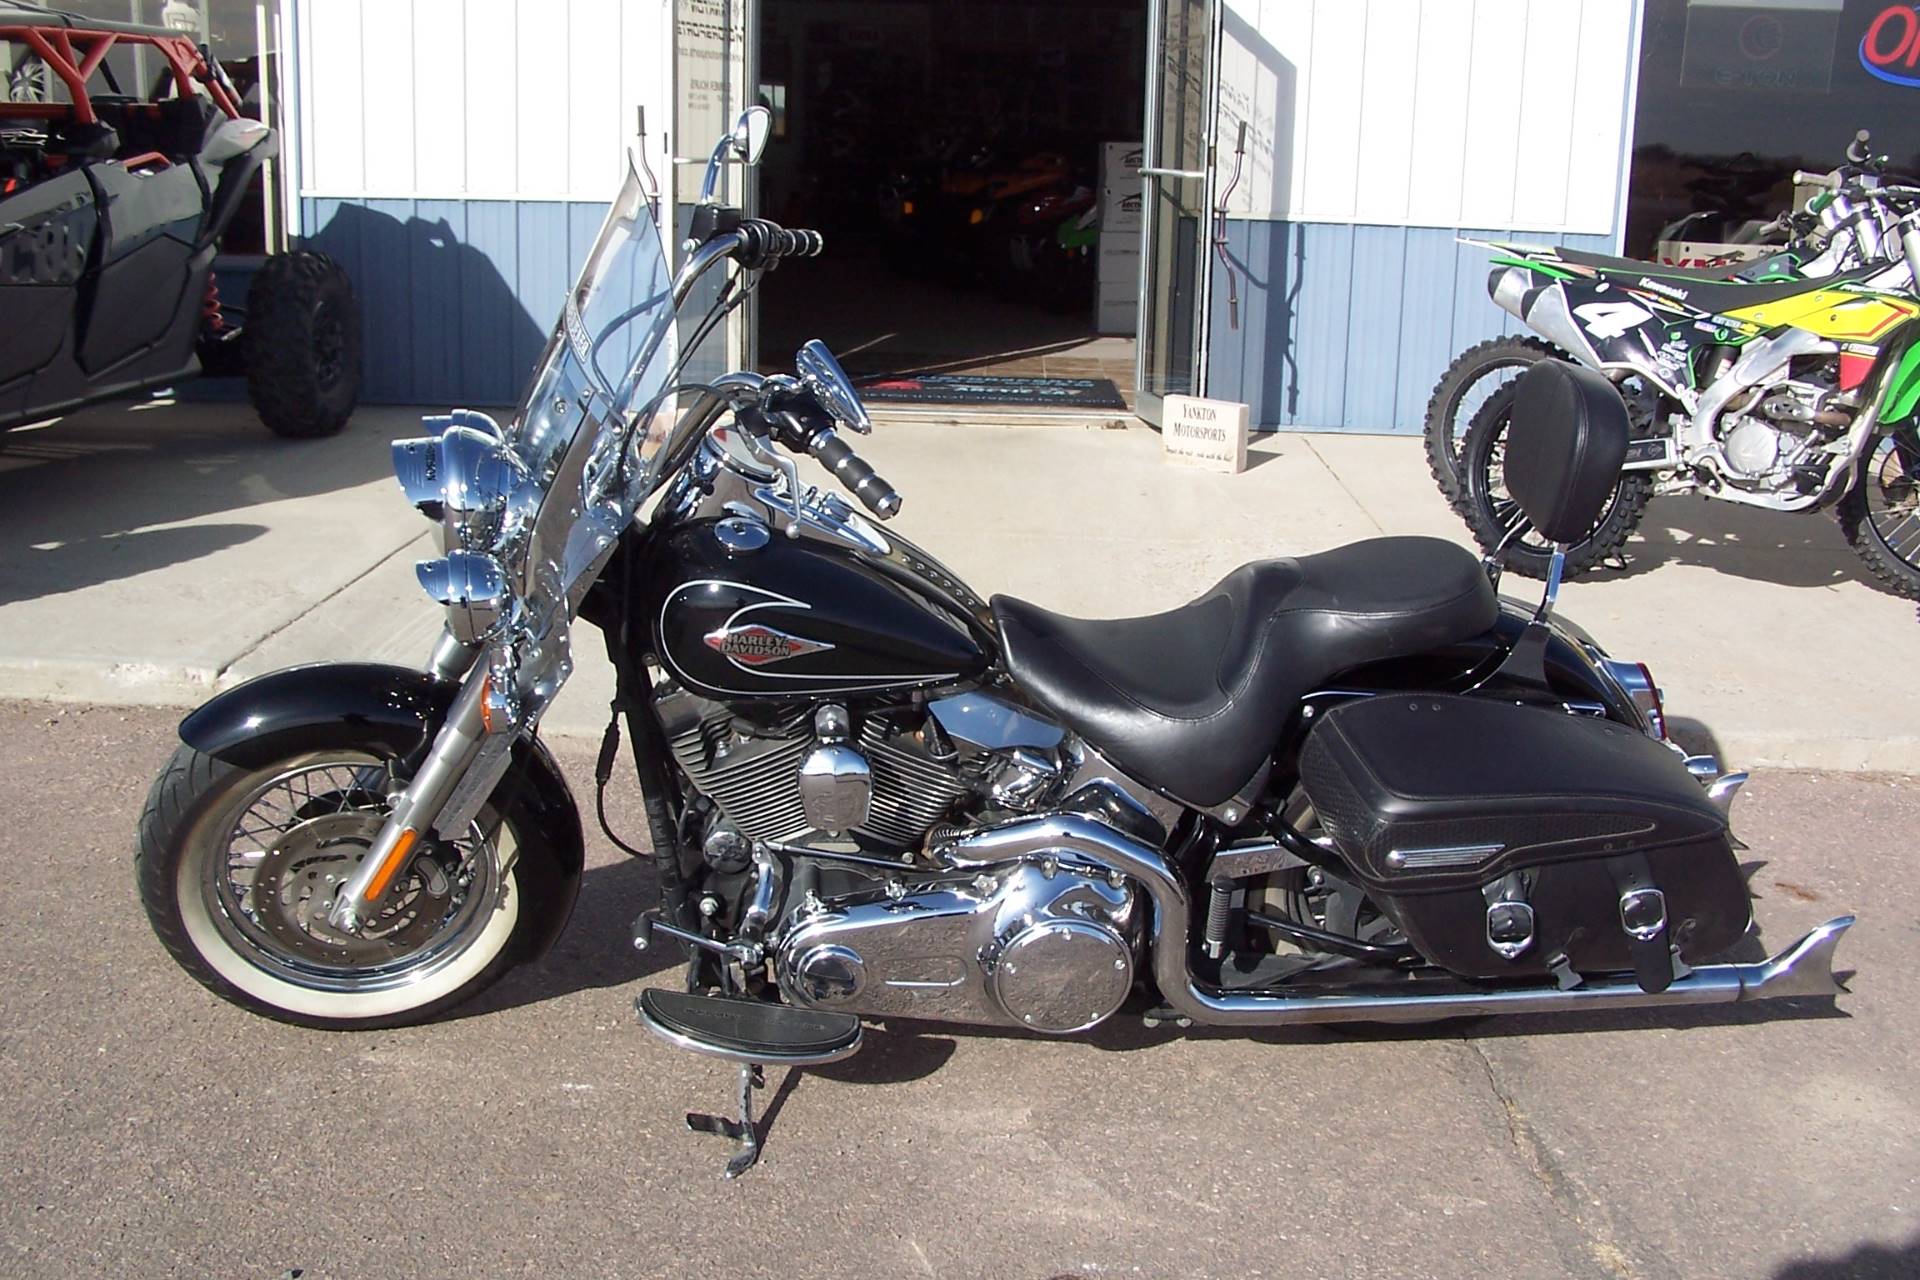 Used 2010 Harley Davidson Heritage Softail Classic Motorcycles In